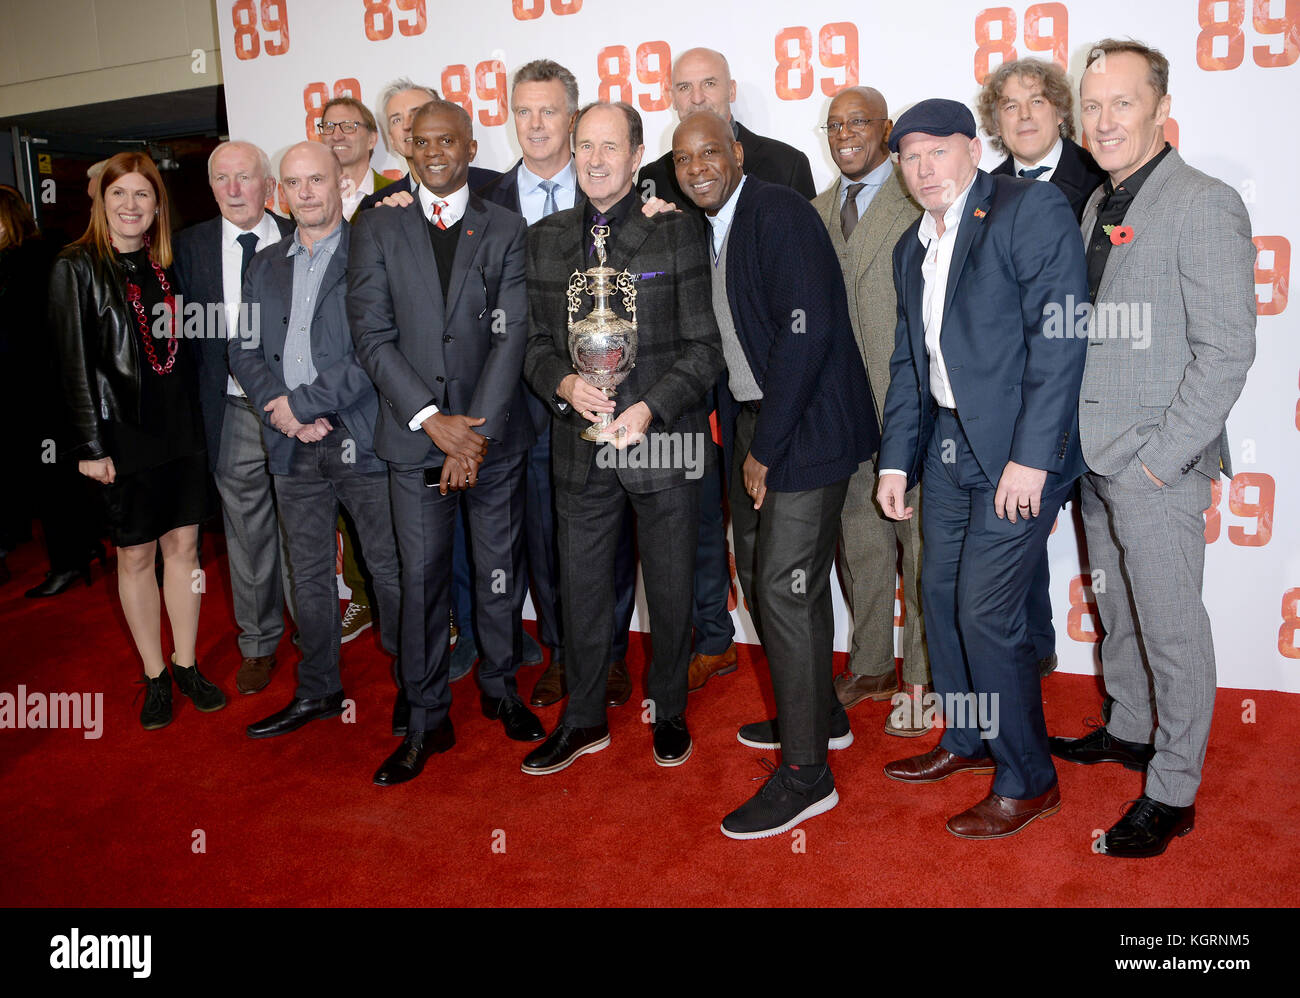 Photo Must Be Credited ©Alpha Press 078237 08/11/2017 Amy Lawrence, Theo Foley, Nick Hornby, Tony Adams, Alan Smith, Paul Davis, David O'Leary, George Graham, Steve Bould, Michael Thomas, Ian Wright, Perry Groves, Alan Davies and Lee Dixon the 89 World Movie Premiere held at Odeon Holloway Cinema in London Stock Photo